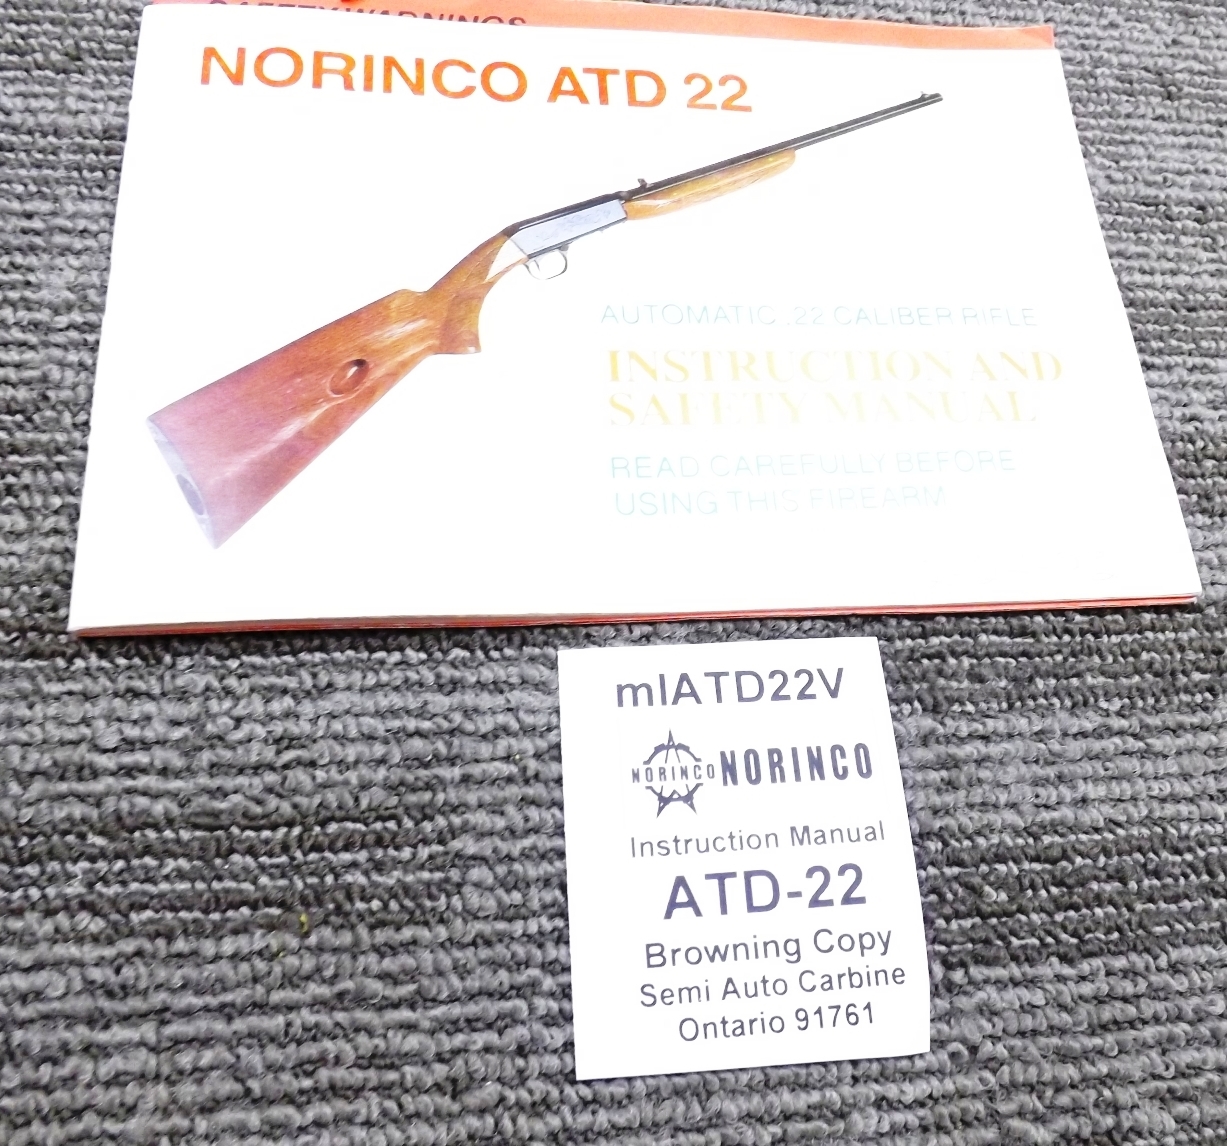 Norinco ATD22 Factory Instruction Manual 1992 Browning Take Down copy VG